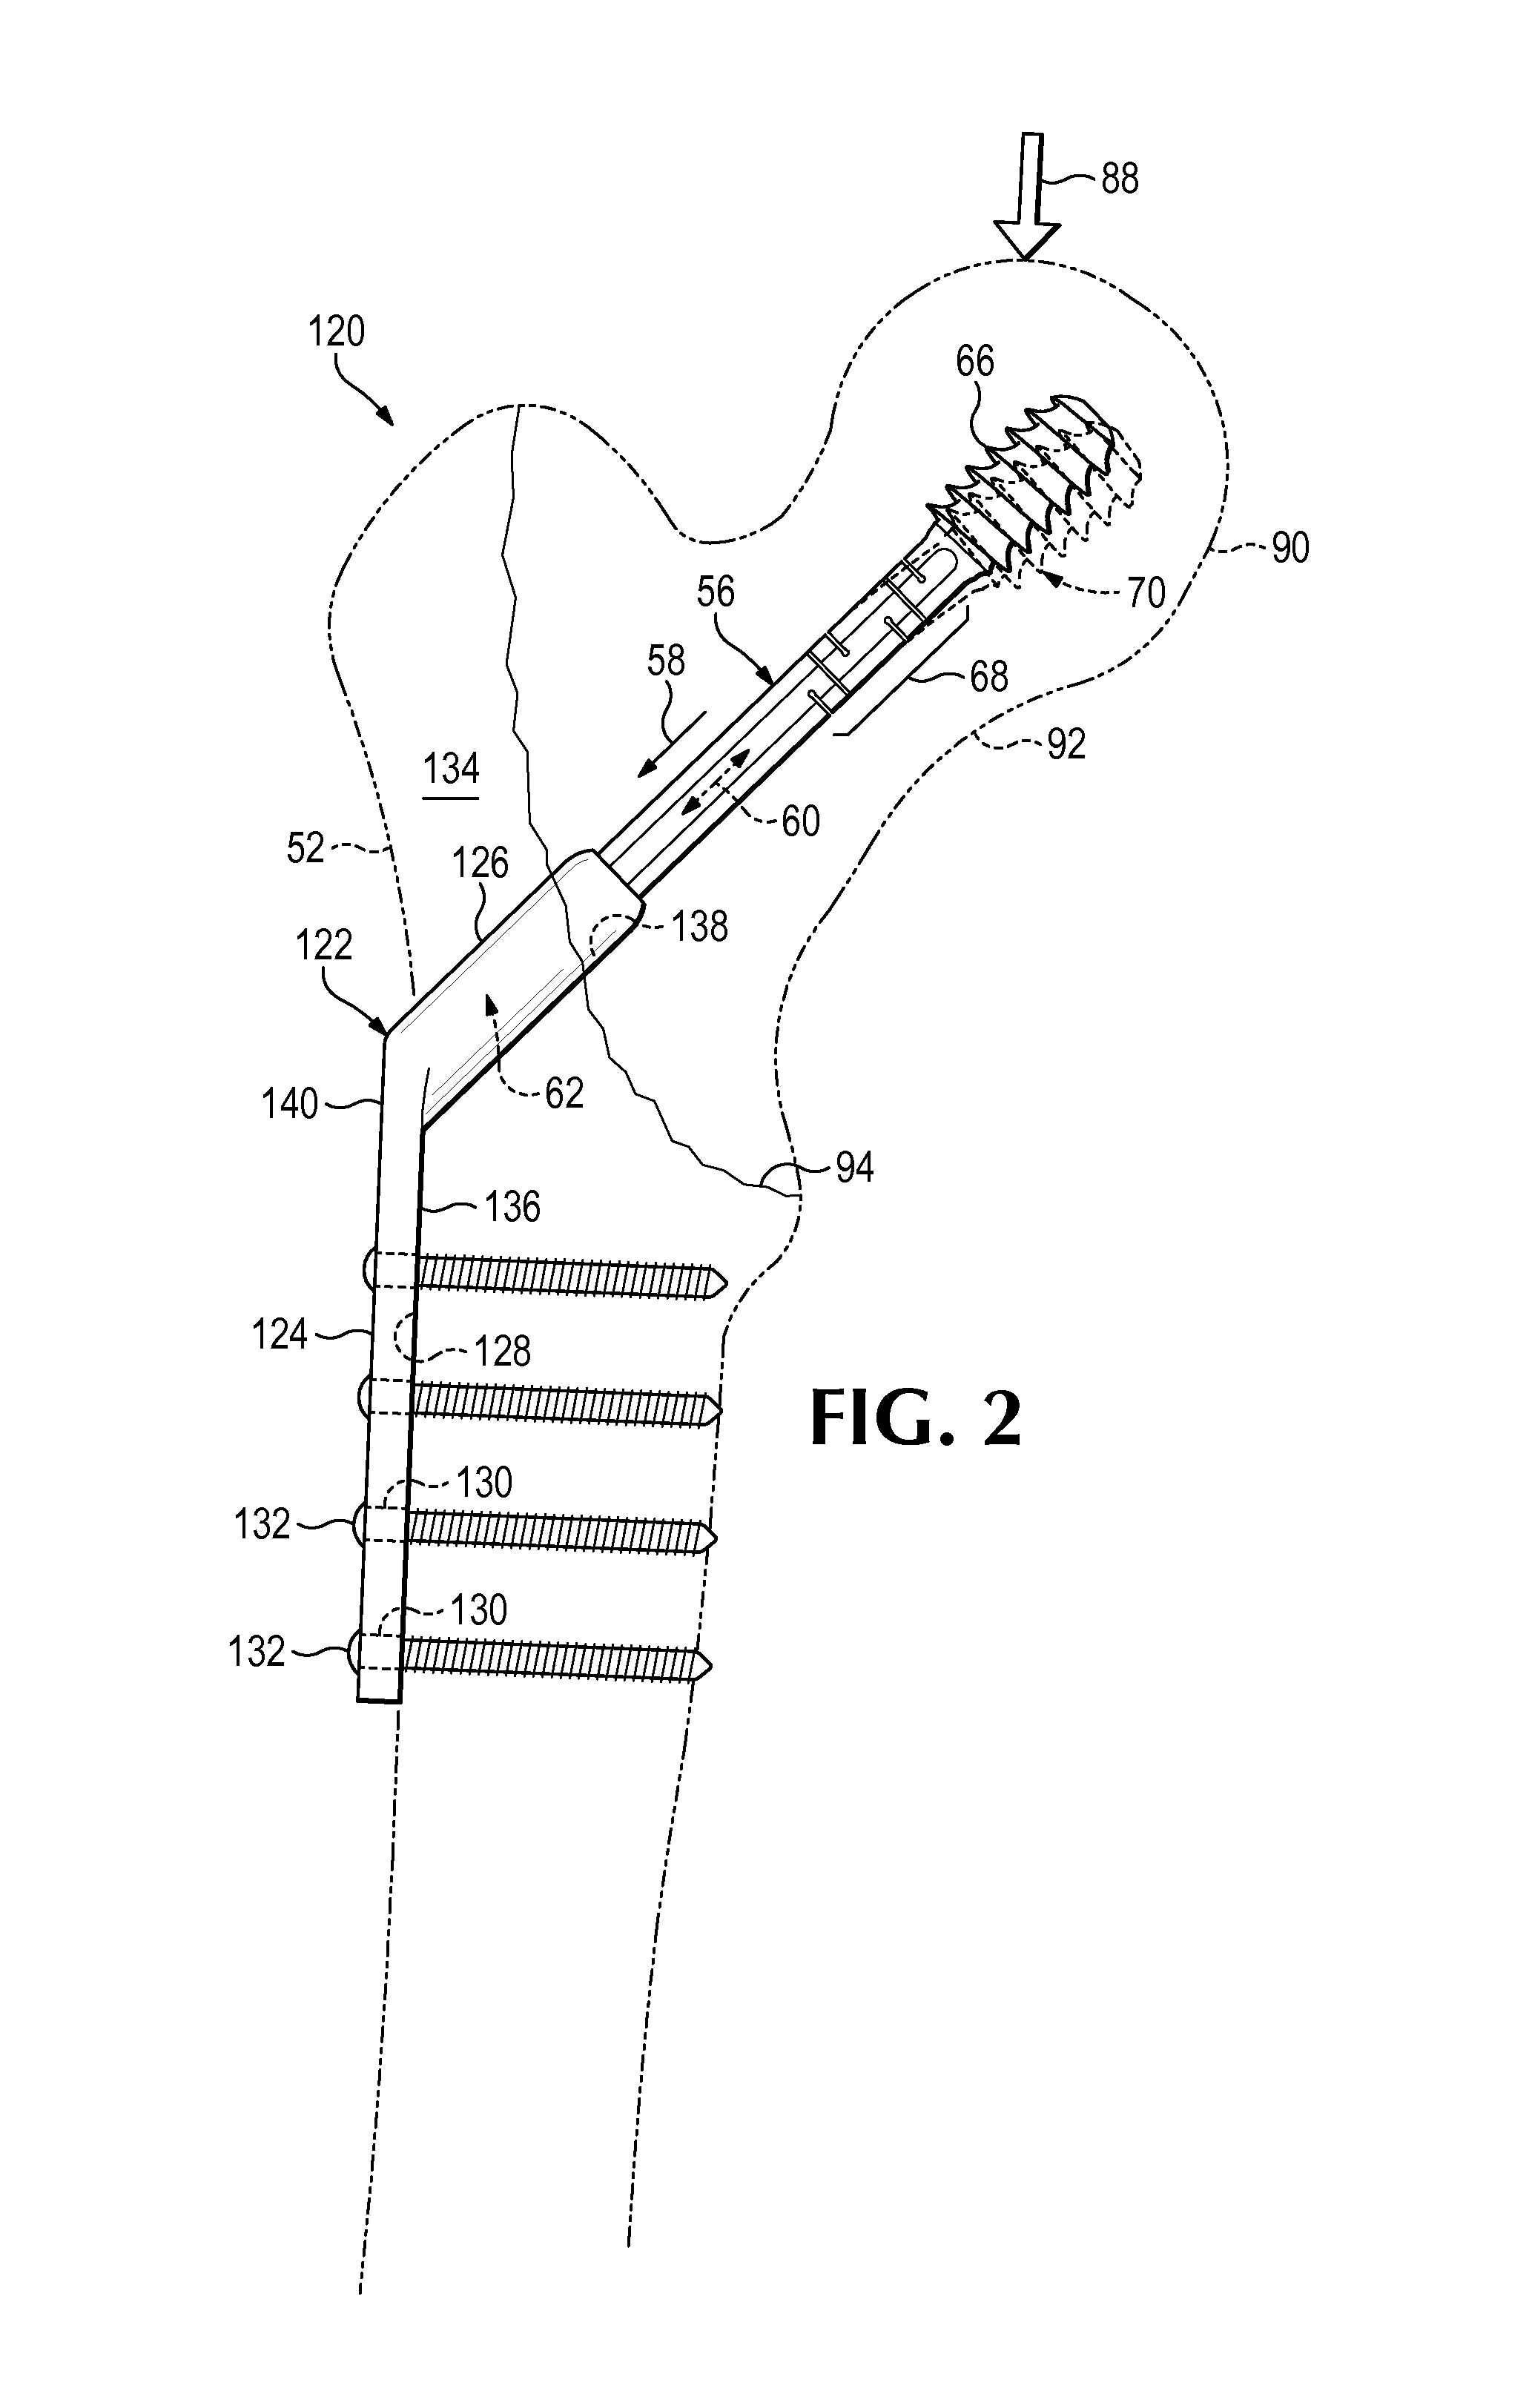 Hip fixation system with a compliant fixation element